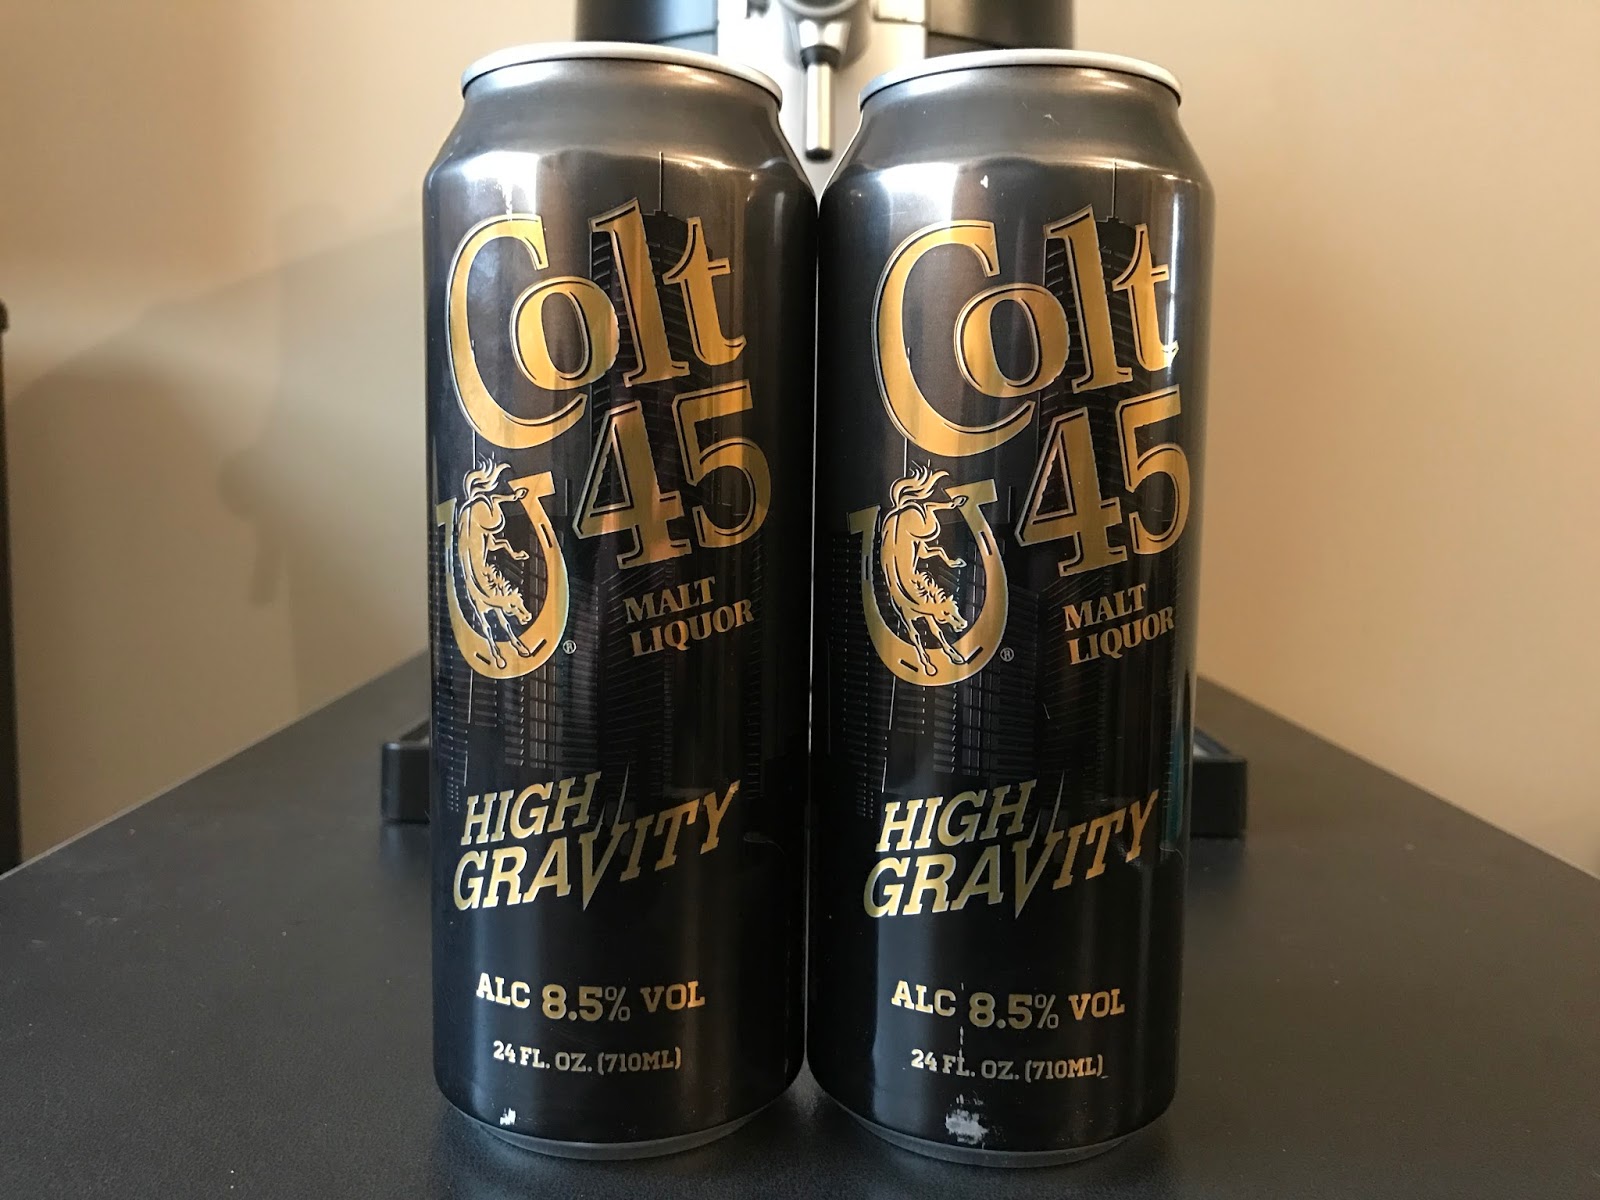 Colt 45® High Gravity Beer Single Can, 24 fl oz - Smith's Food and Drug